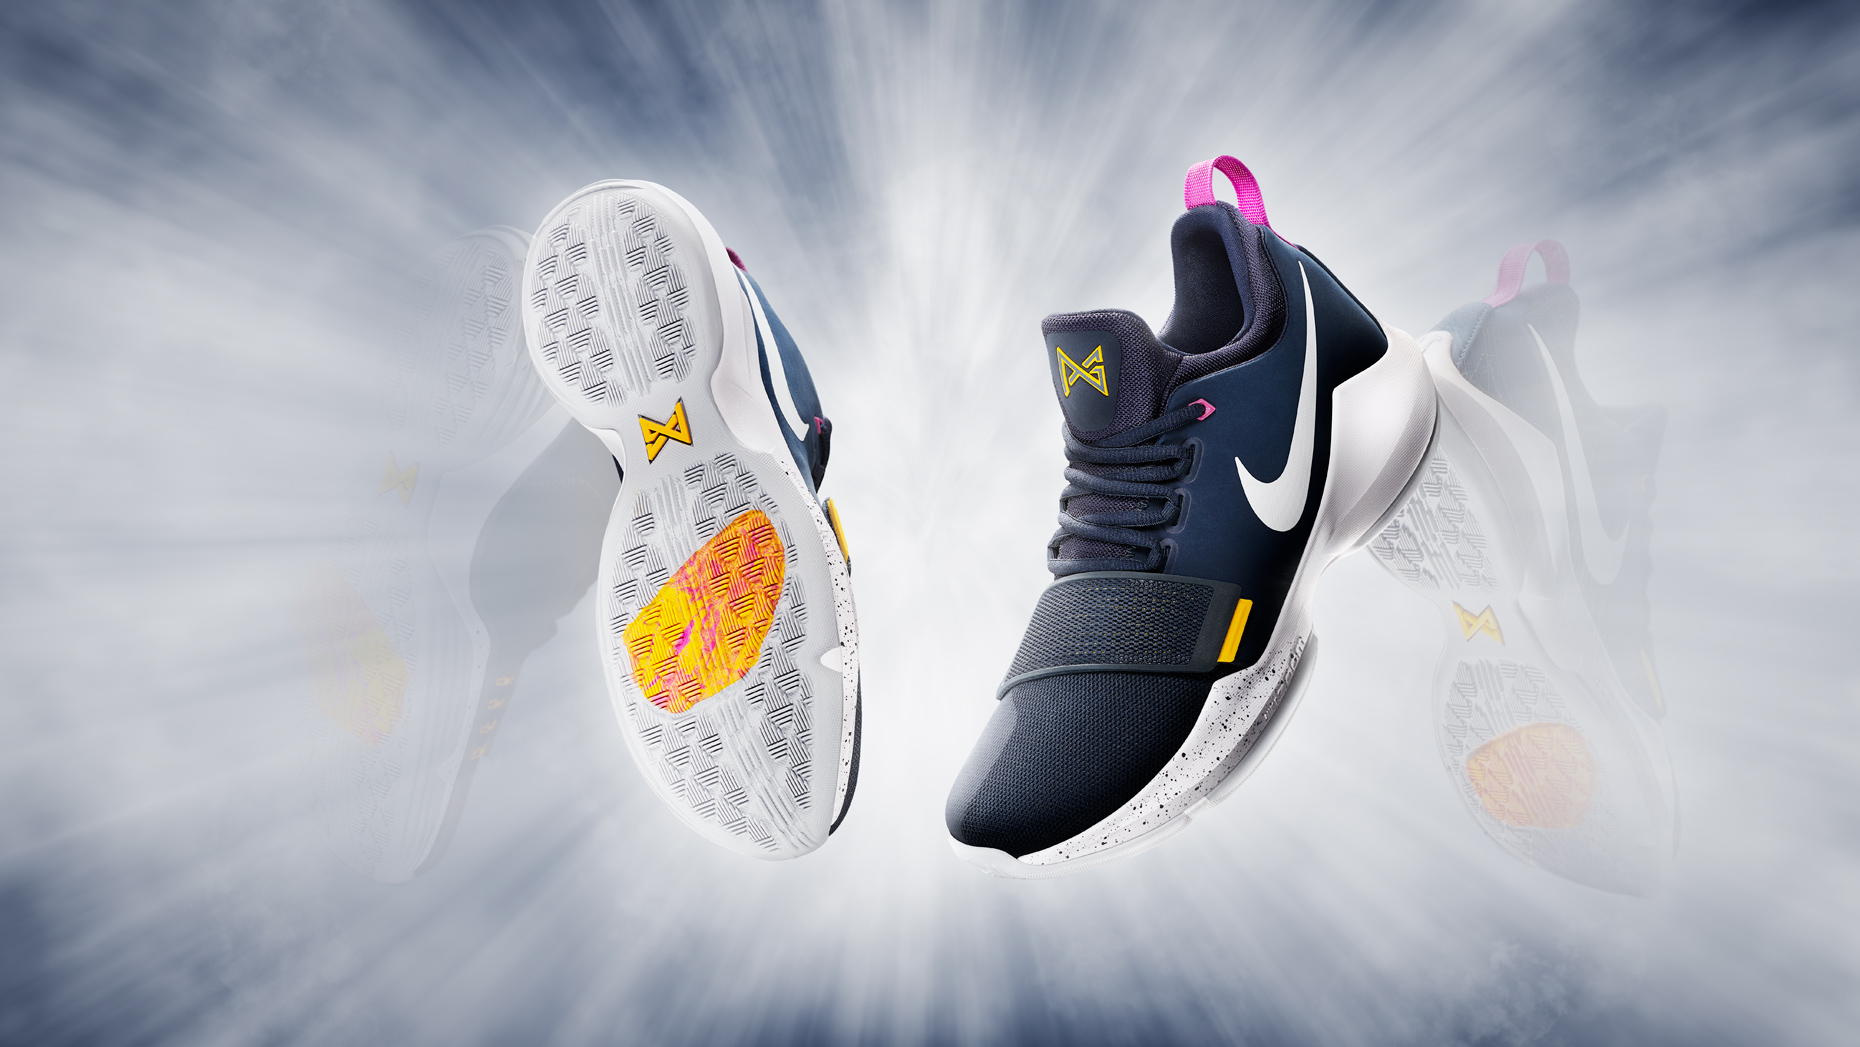 Nike Footwear Image Effects, Retouching and Environment Creation